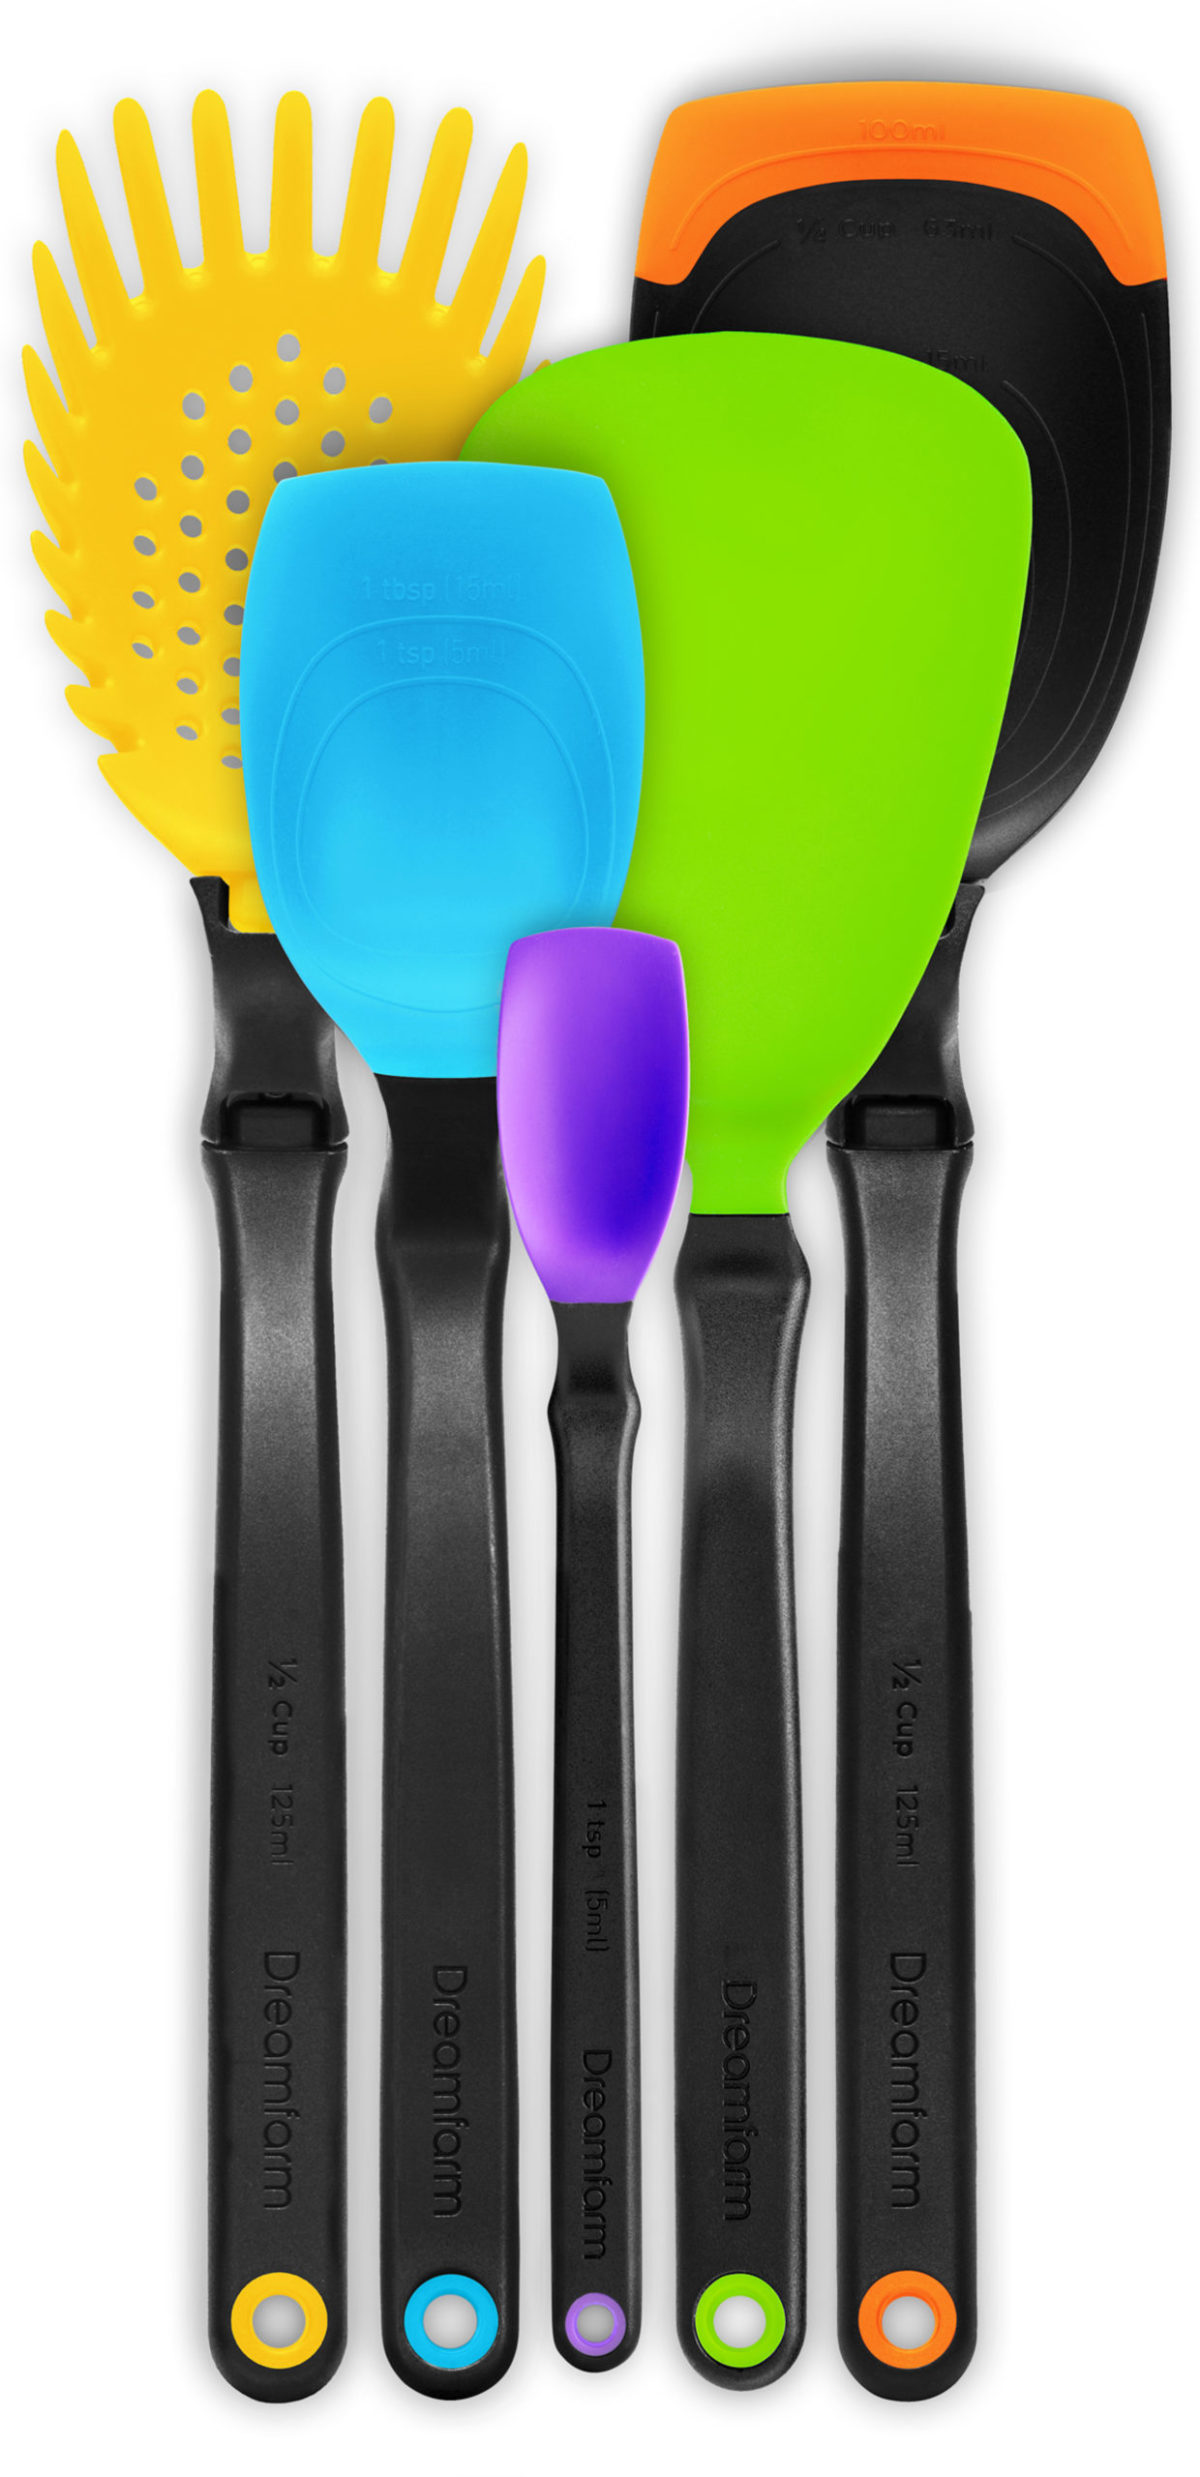 A set of cooking utensils